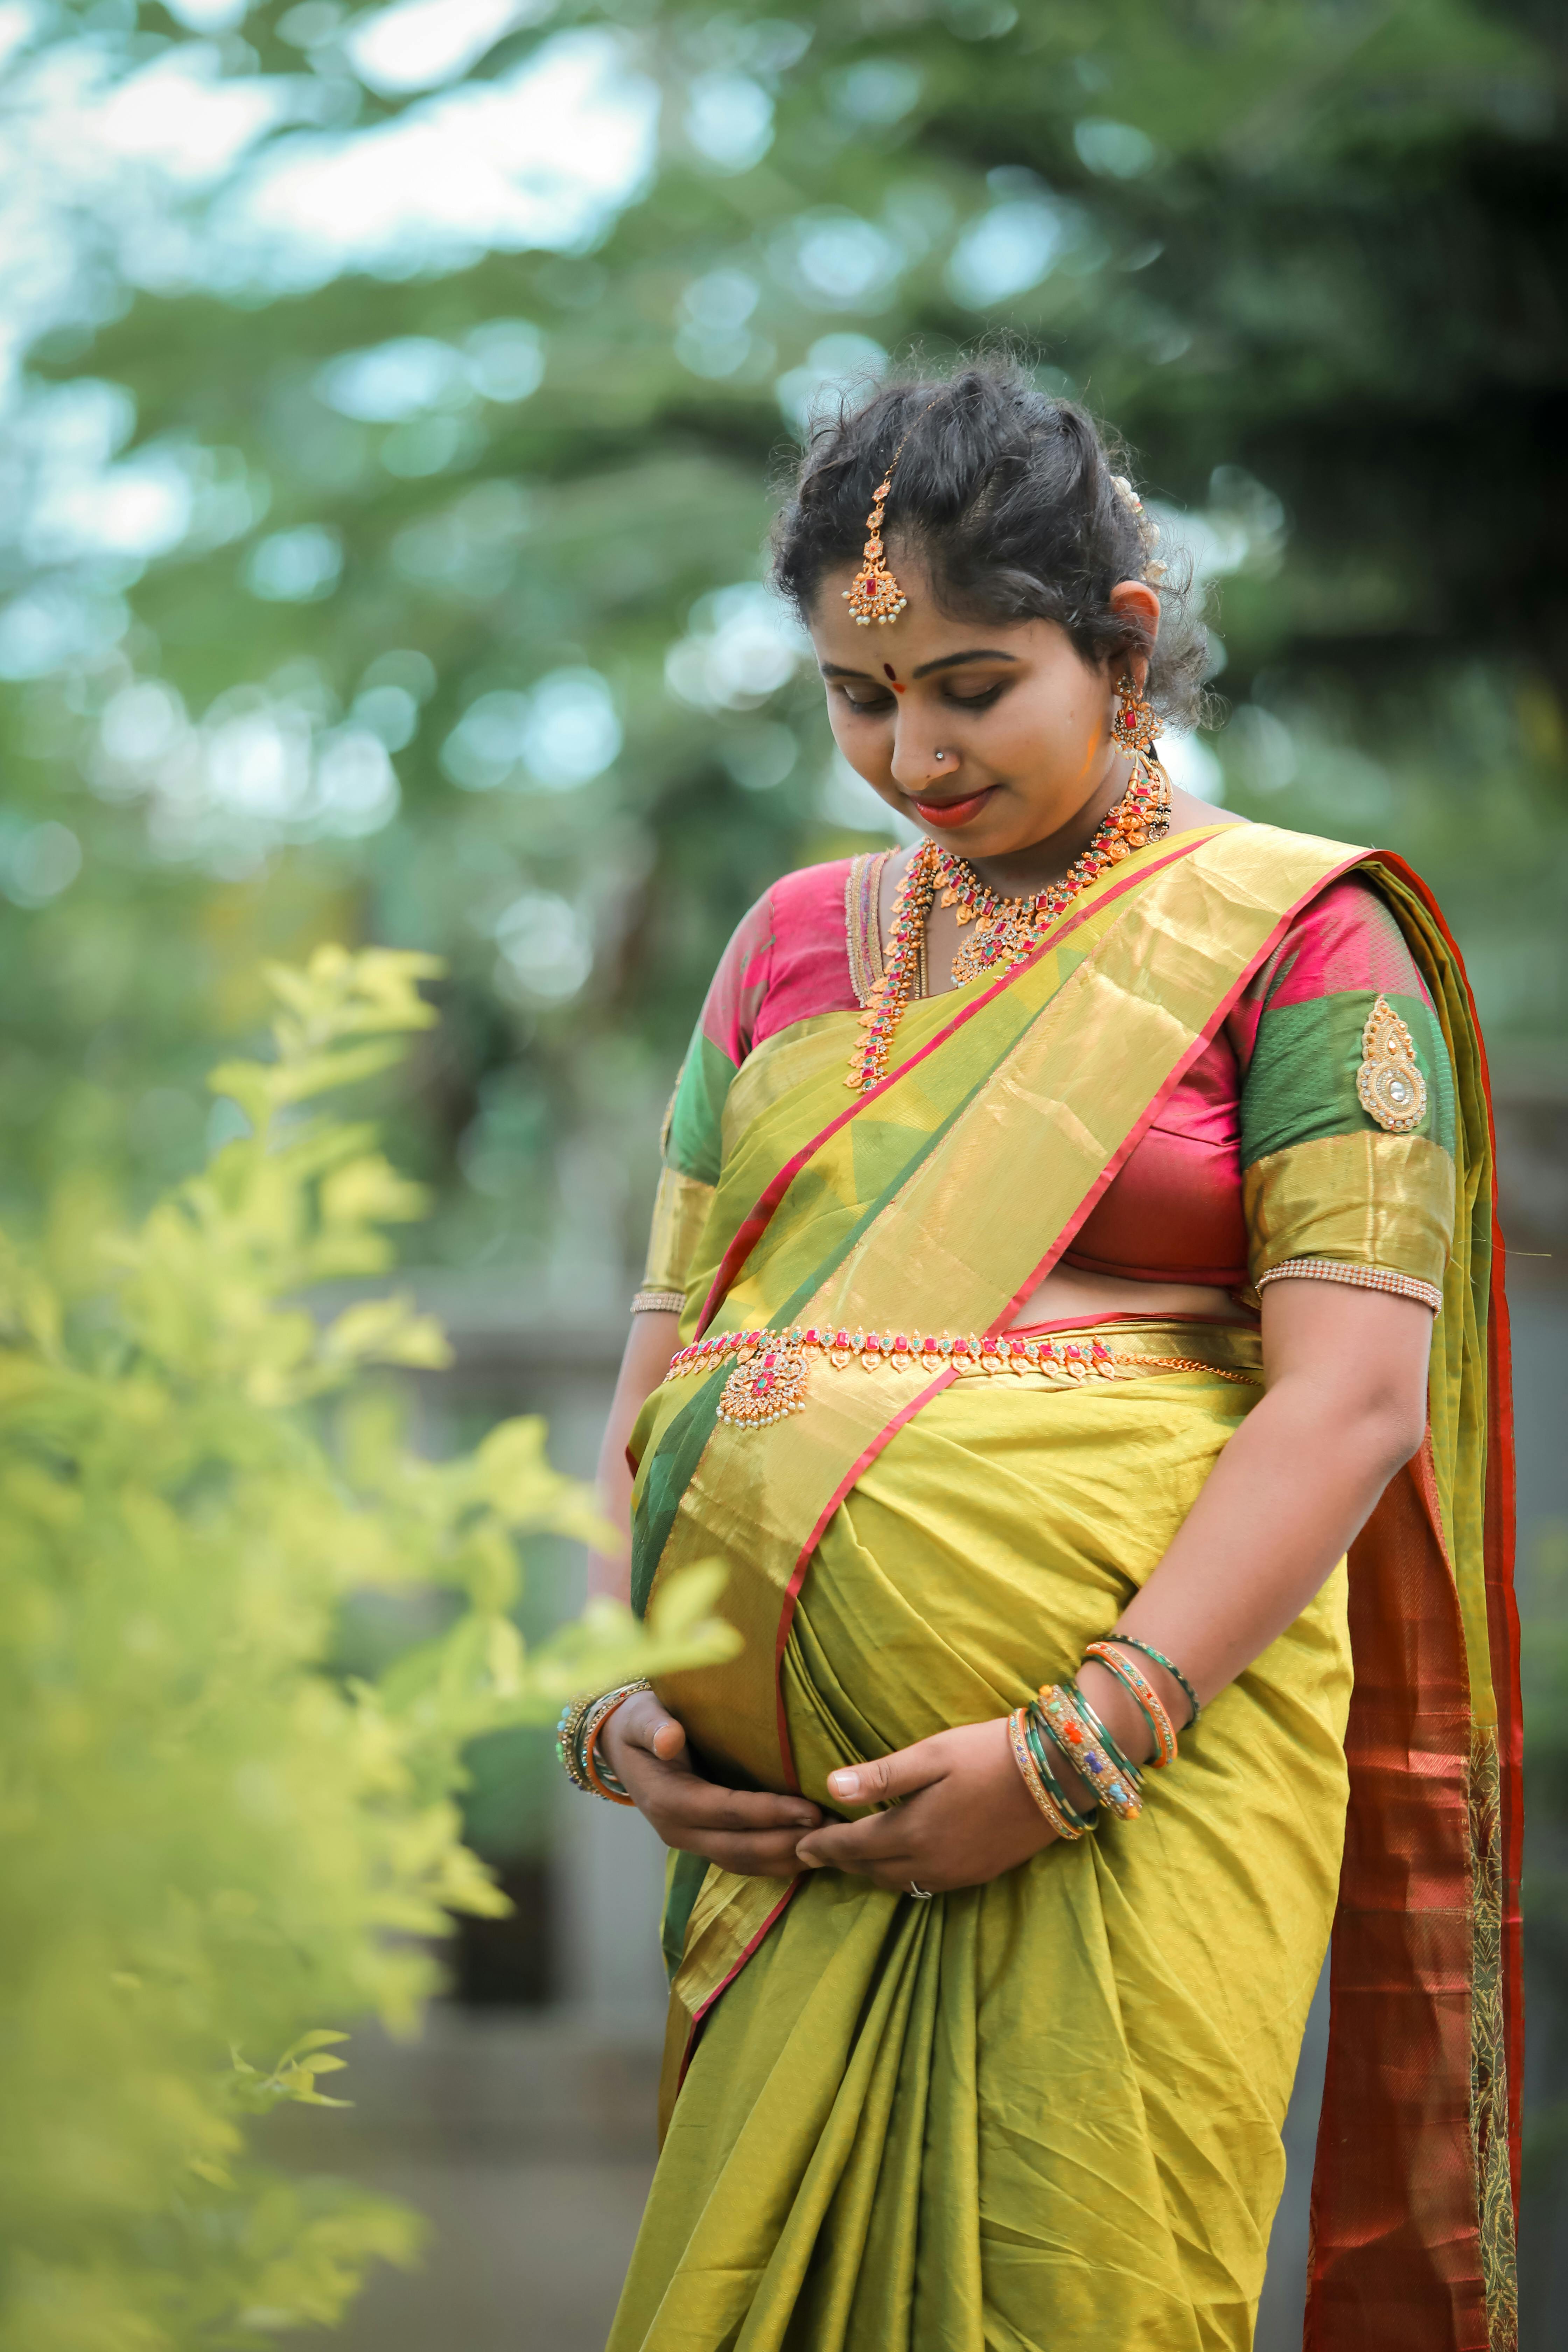 How to wear saree during pregnancy